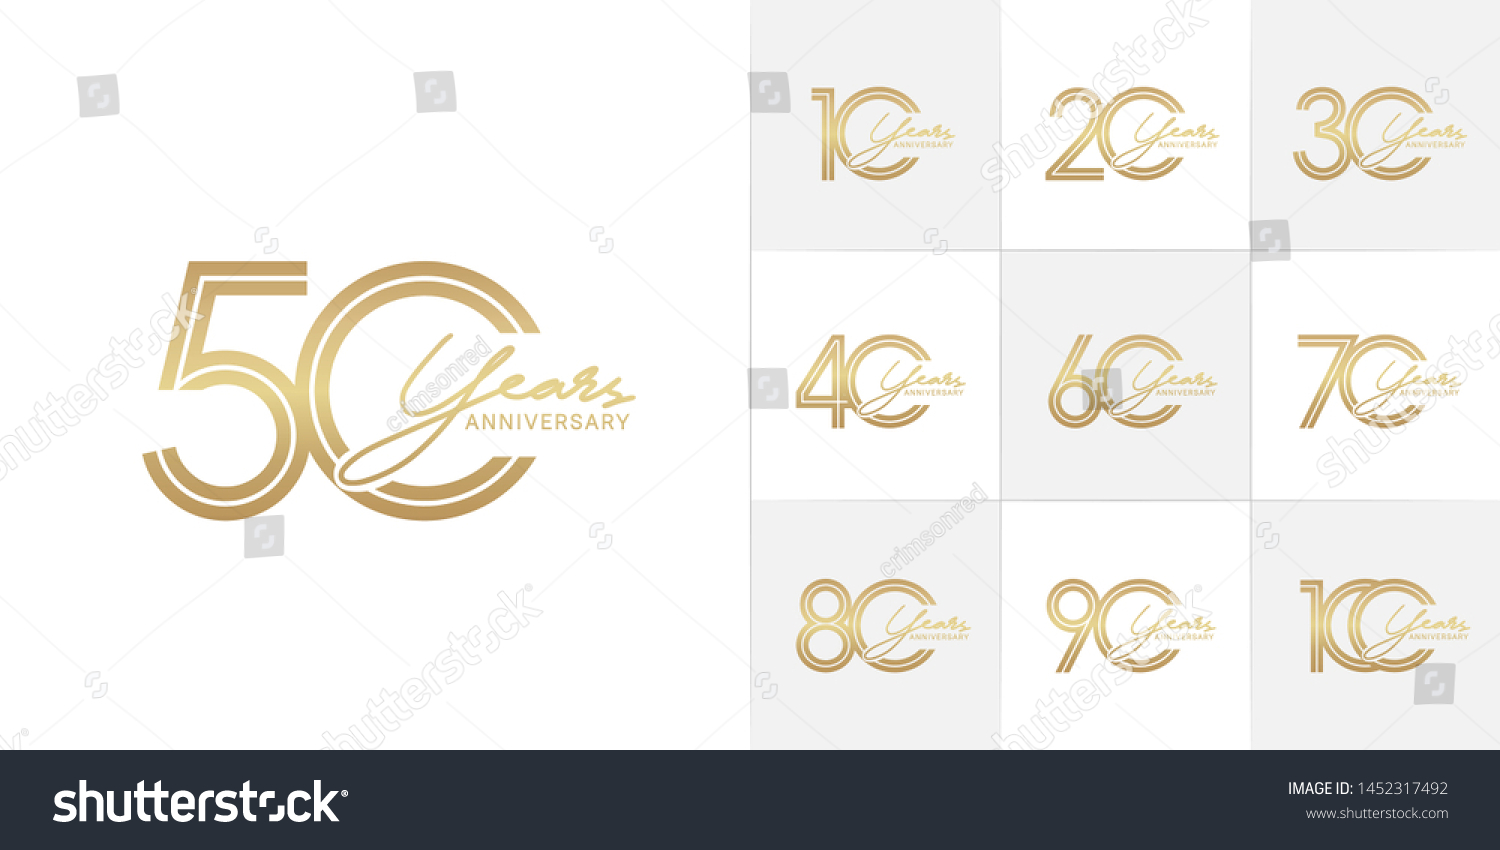 SVG of set of anniversary logotype with multiple line style gold color for celebration event, greeting card, invitation and wedding celebration svg